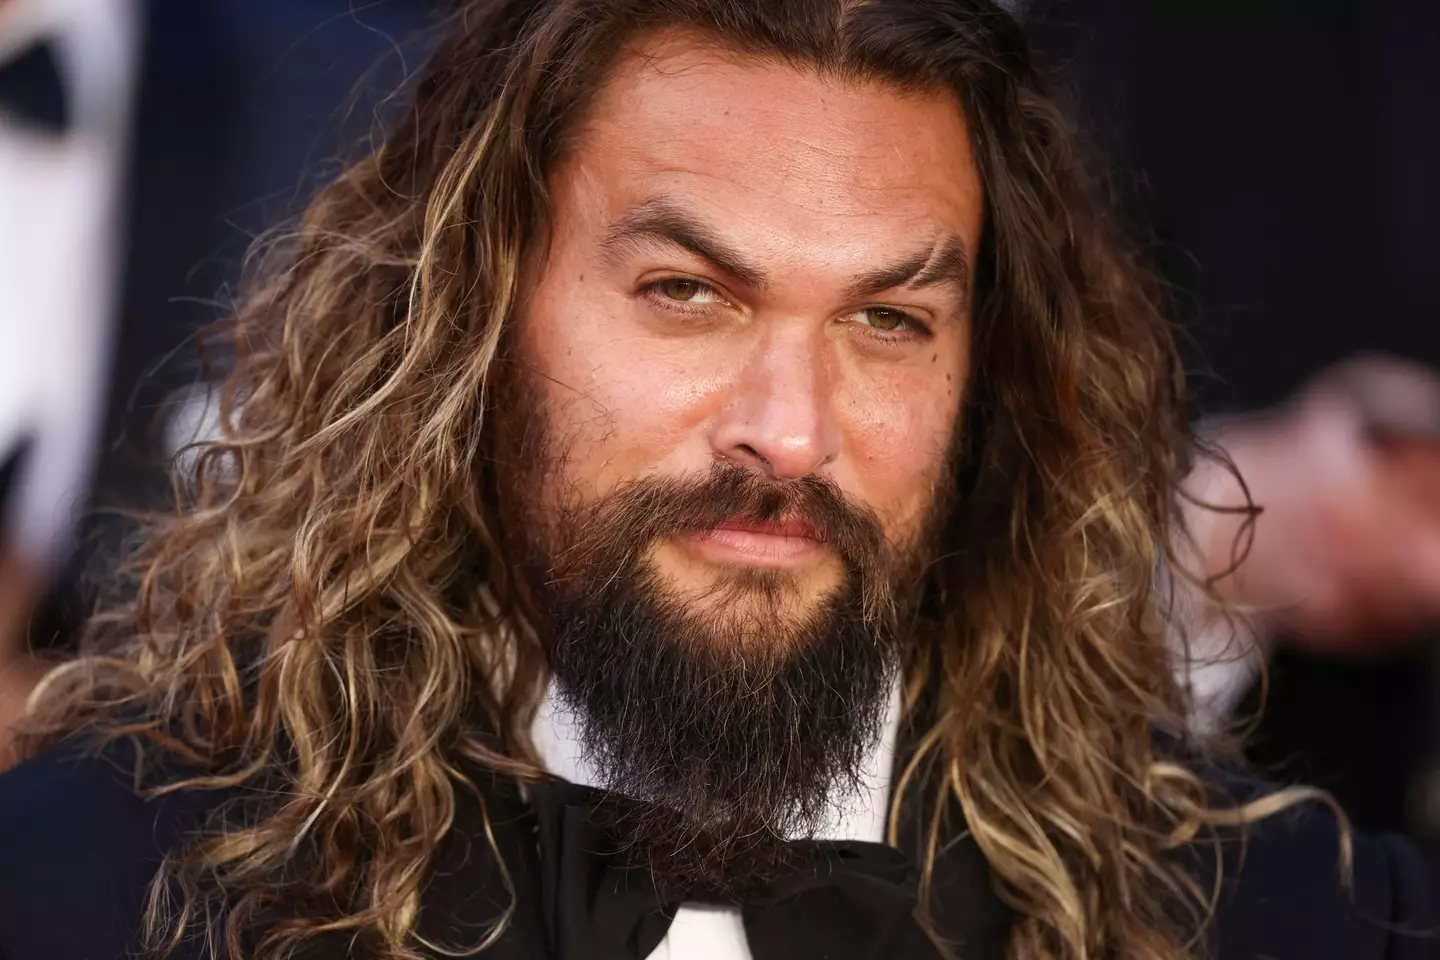 Jason Momoa fans have been left gobsmacked by the story behind his facial scar.